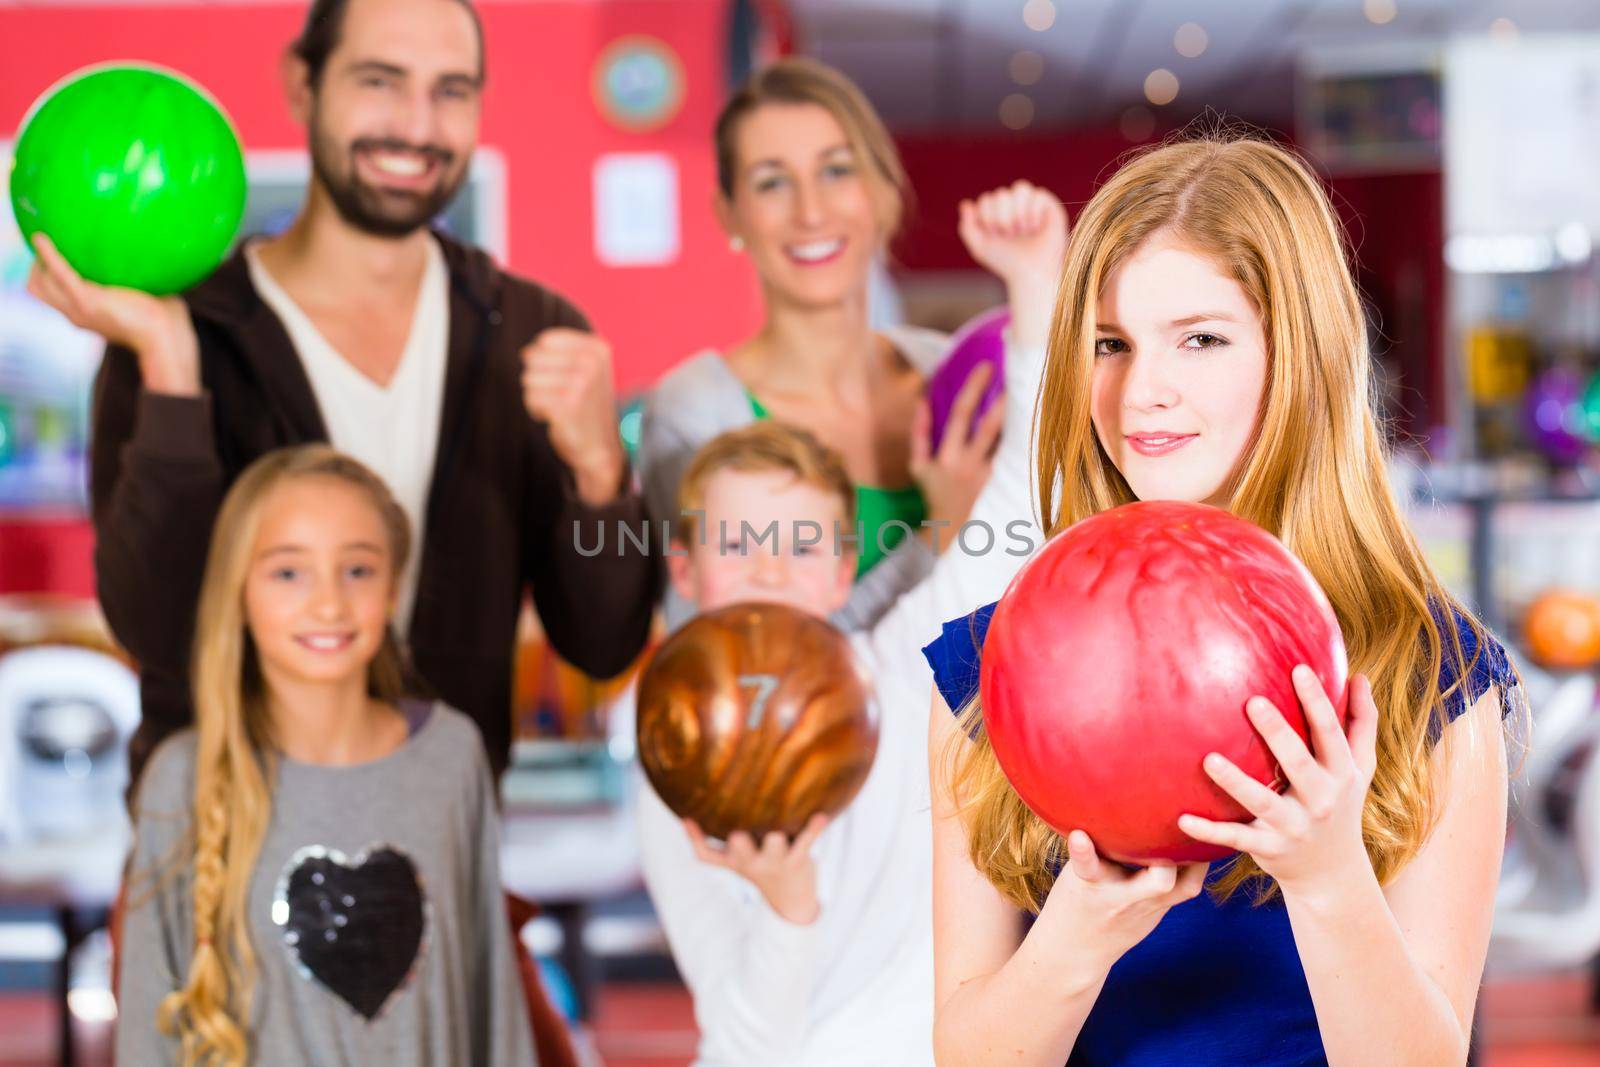 Family at Bowling Center by Kzenon